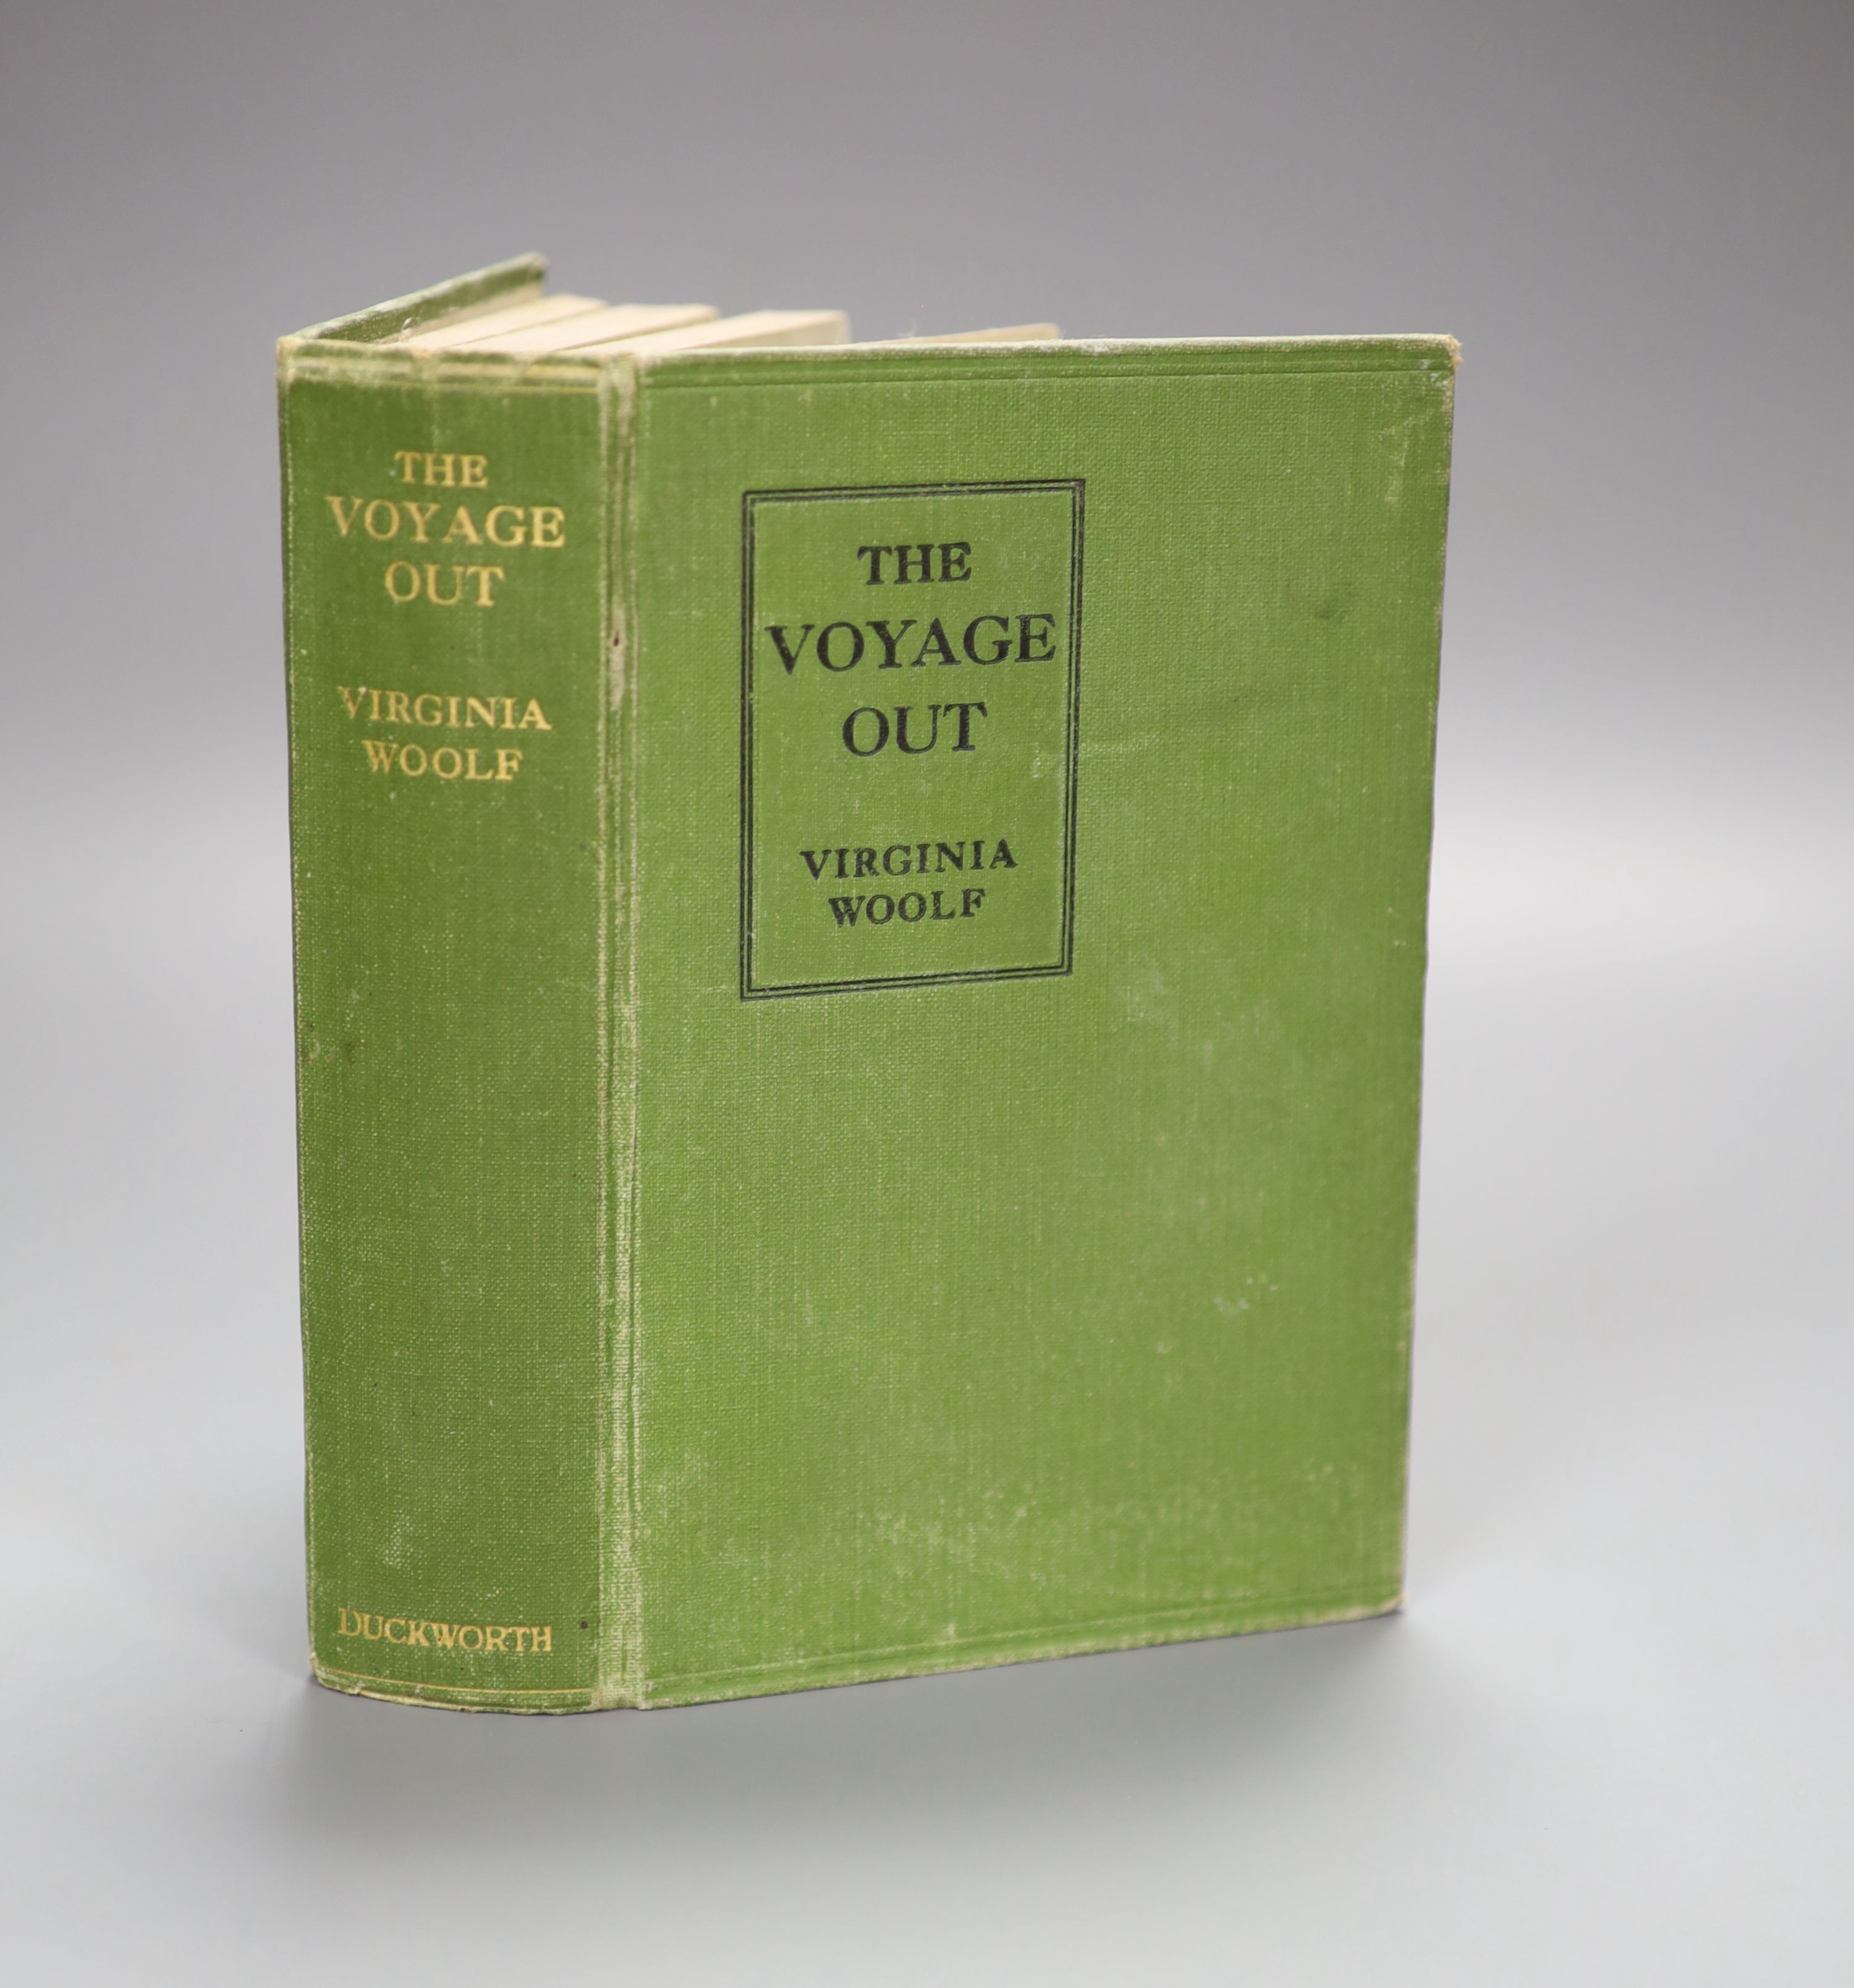 Woolf, Virginia- The Voyage Out, 1st edition, original cloth, gilt titling to spine, bumped and rubbed, title and early and final leaves spotted, Duckworth & Co., London, 1915, Note:- Only 2000 copies printed on March 26